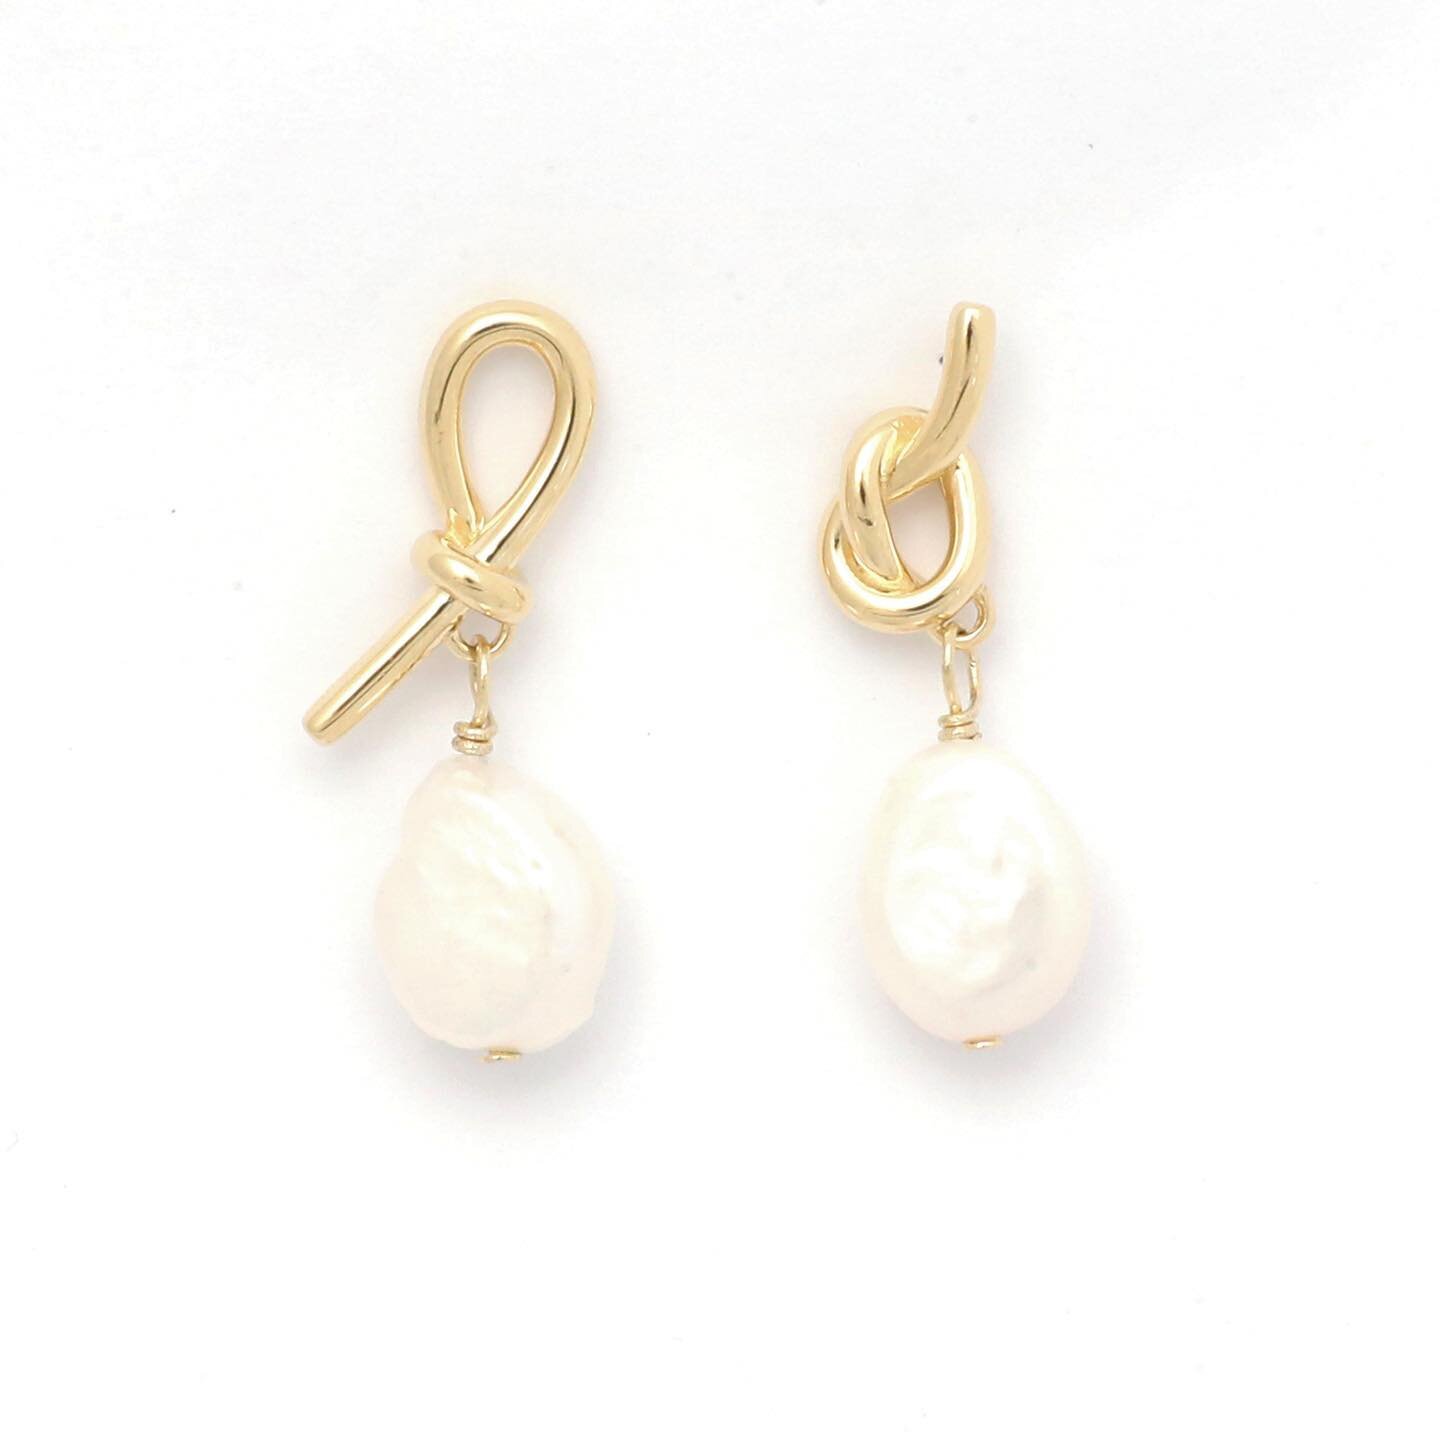 Perfectly mismatched Pearl Knot Earrings 🙌✨